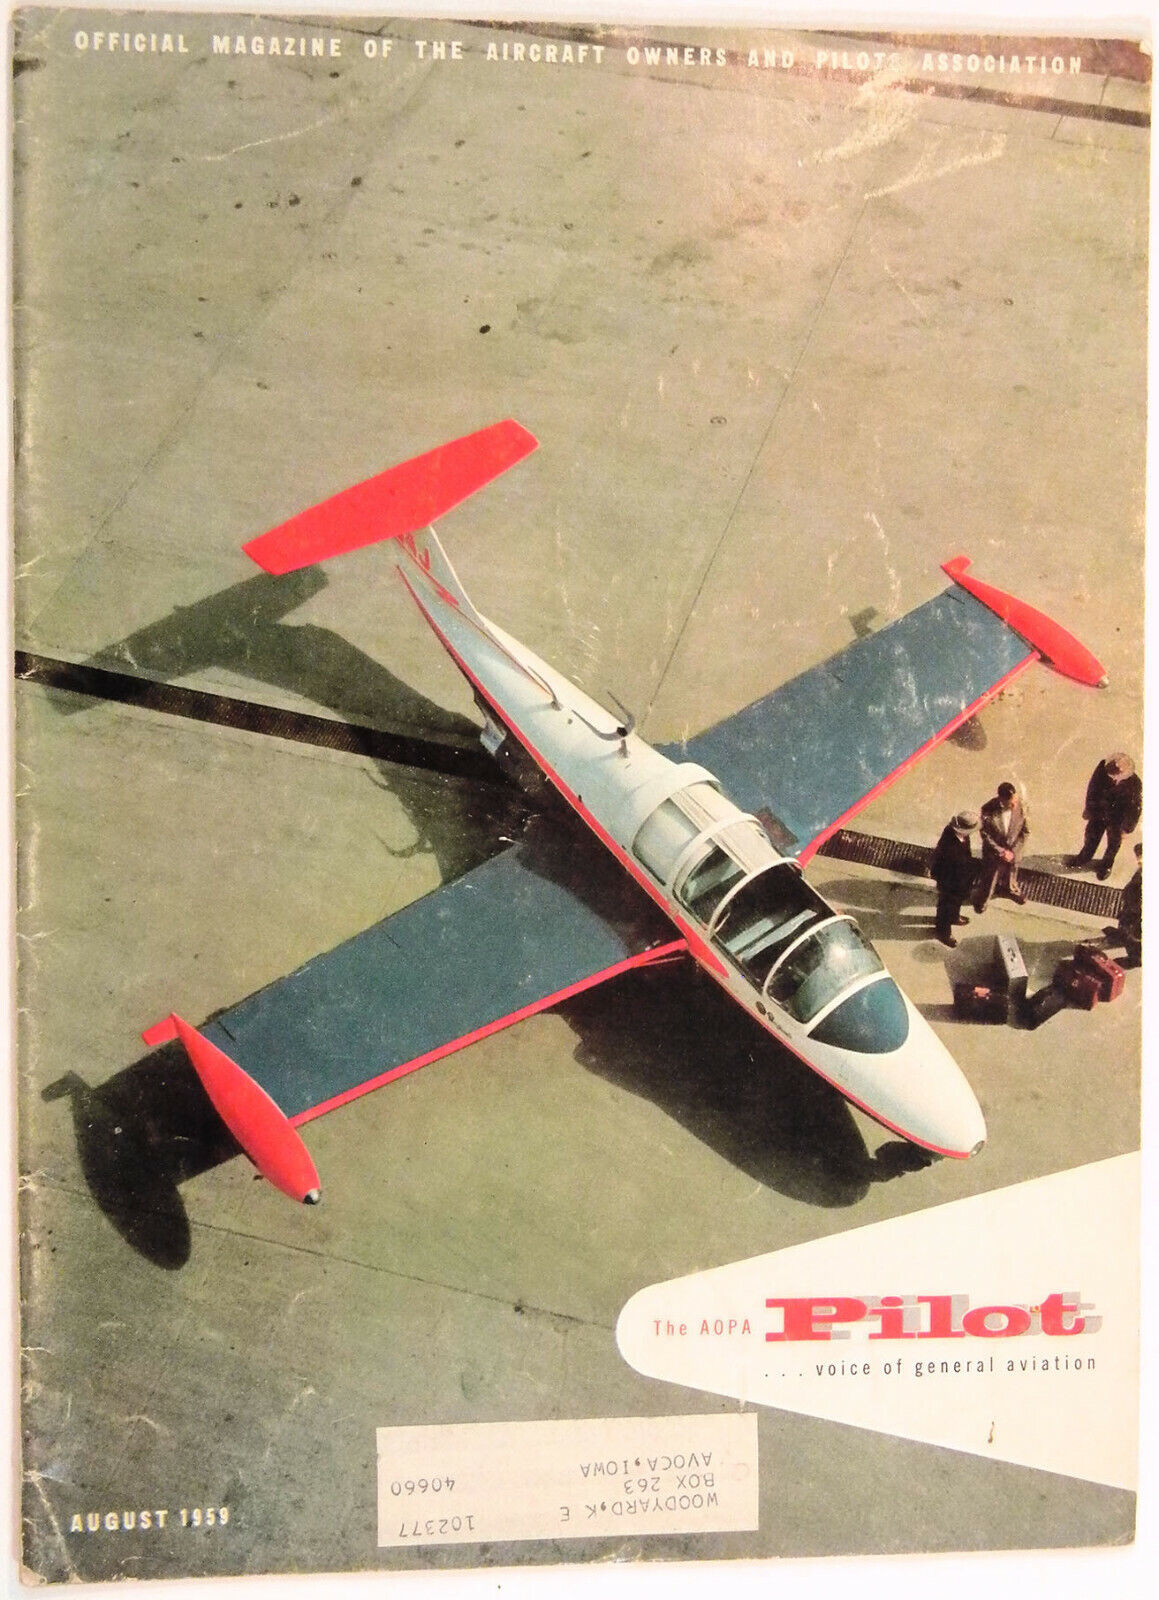 AOPA Pilot, Aug. 1959, Beech Looks After Its Own, Hypoxia, Omnigation, Vortices